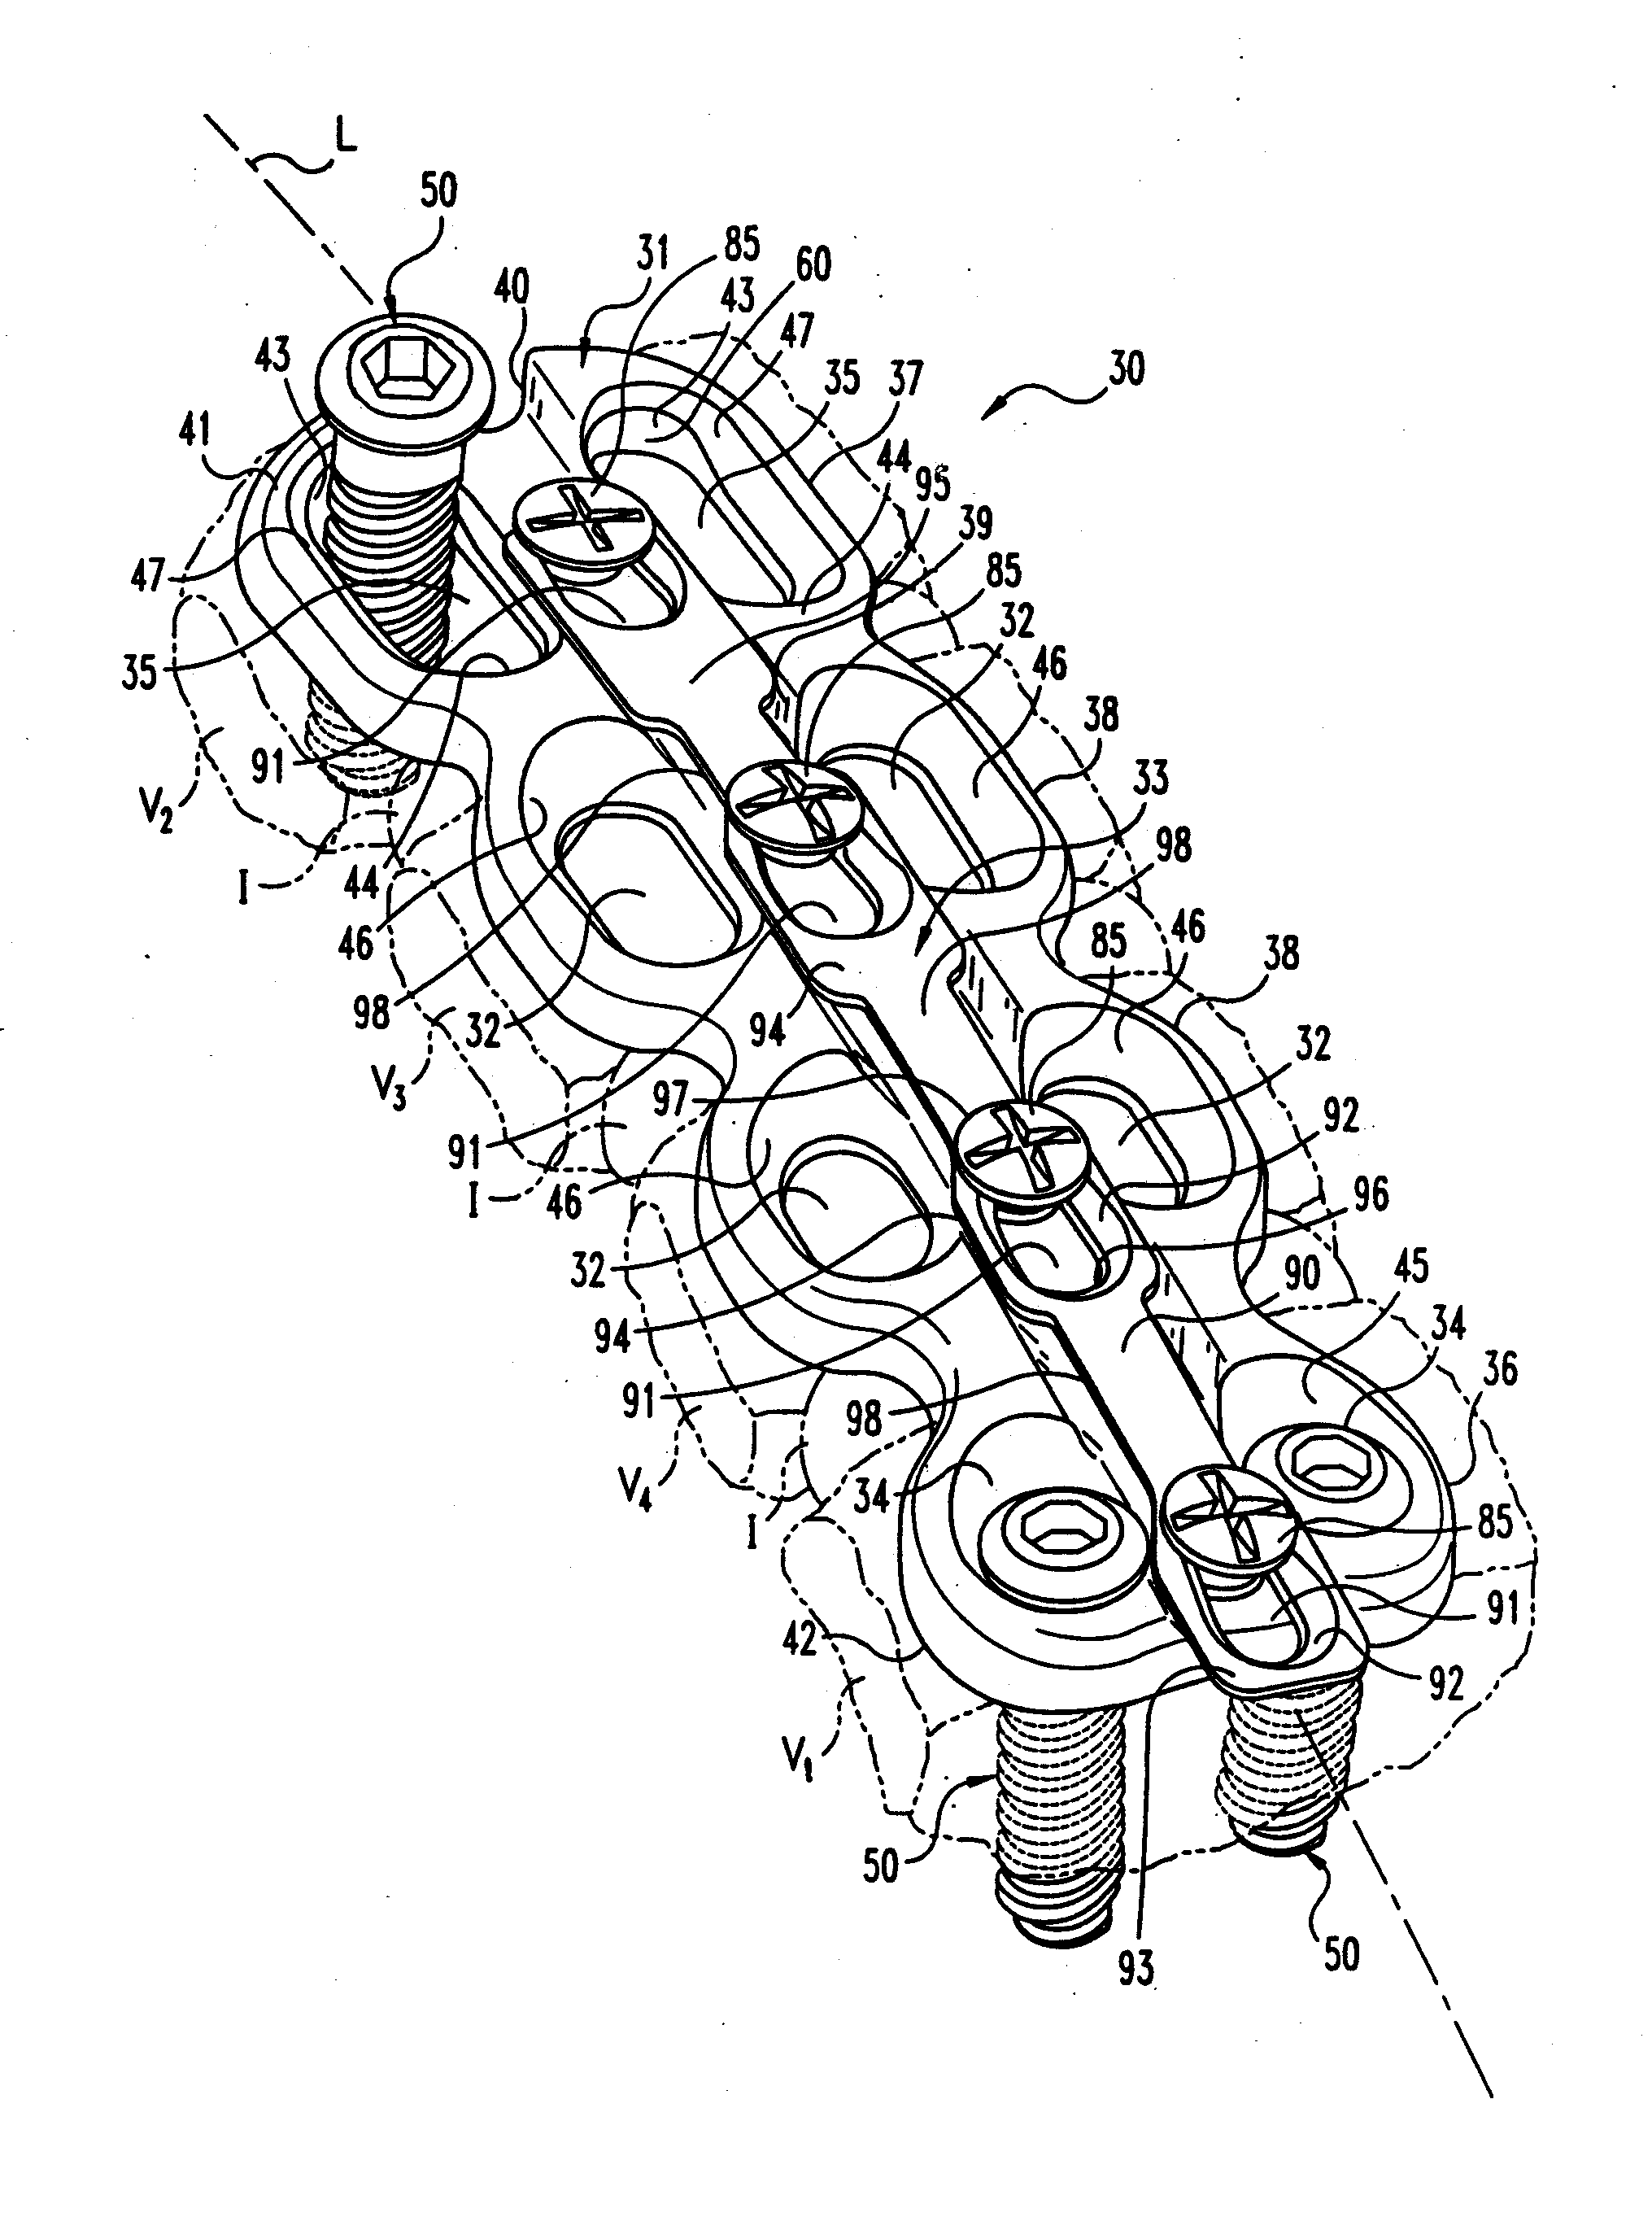 Anterior cervical plating system and method